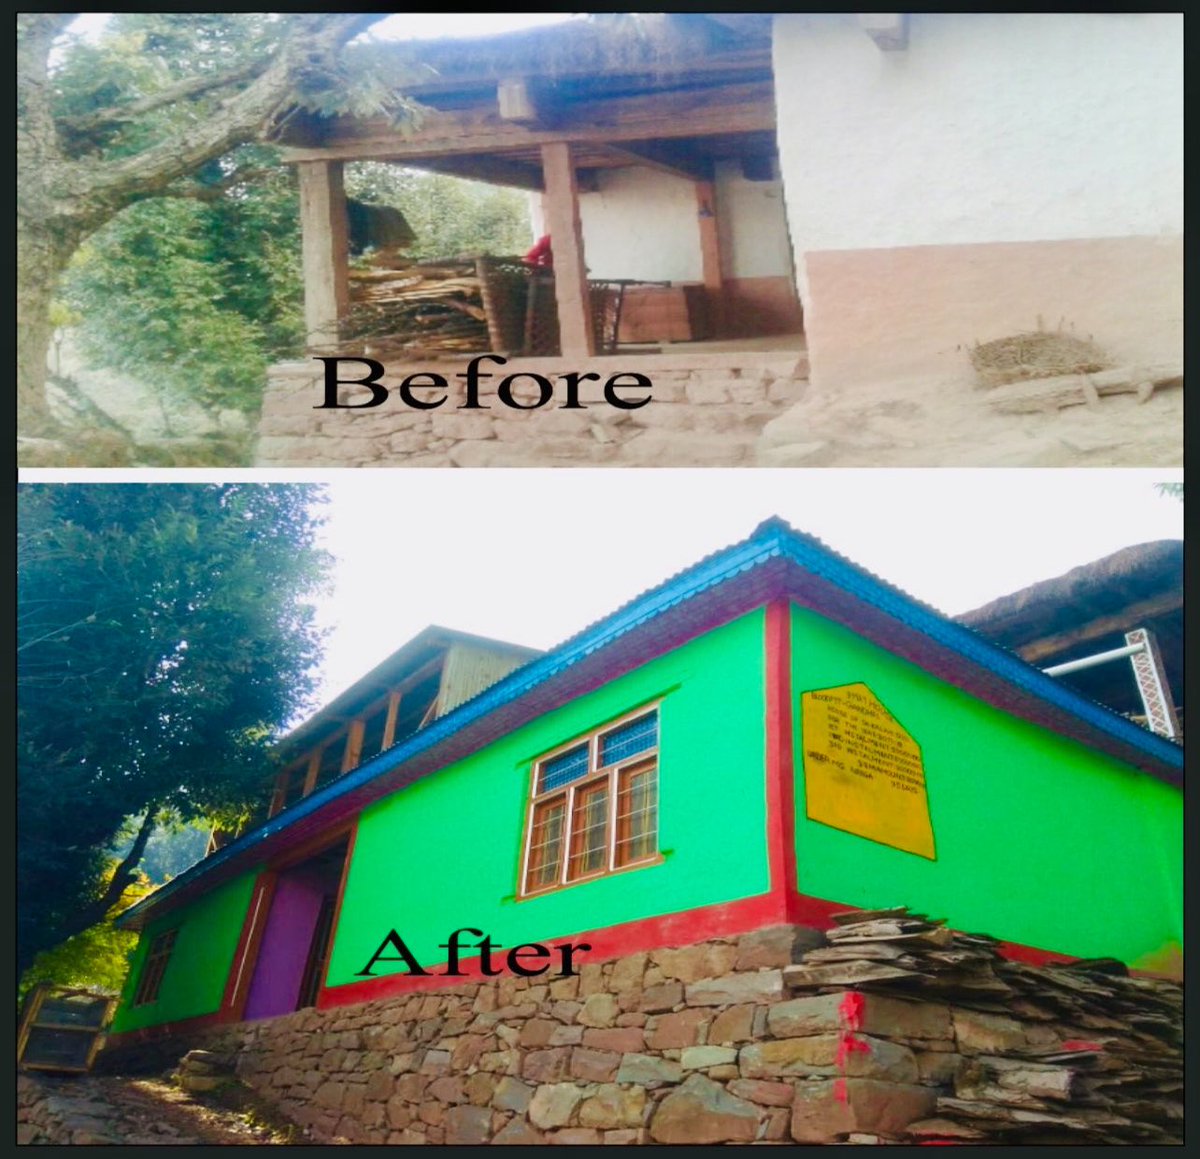 Kalam Din, a symbol of resilience & progress in Block & #PanchayatGandhri, #RambanDistrict #JKUT. From living in a challenging environment to becoming a beneficiary under #PMAYG #MGNREGA & #SBM schemes, his journey inspires us all. #Progress #Hope #housing #ANI